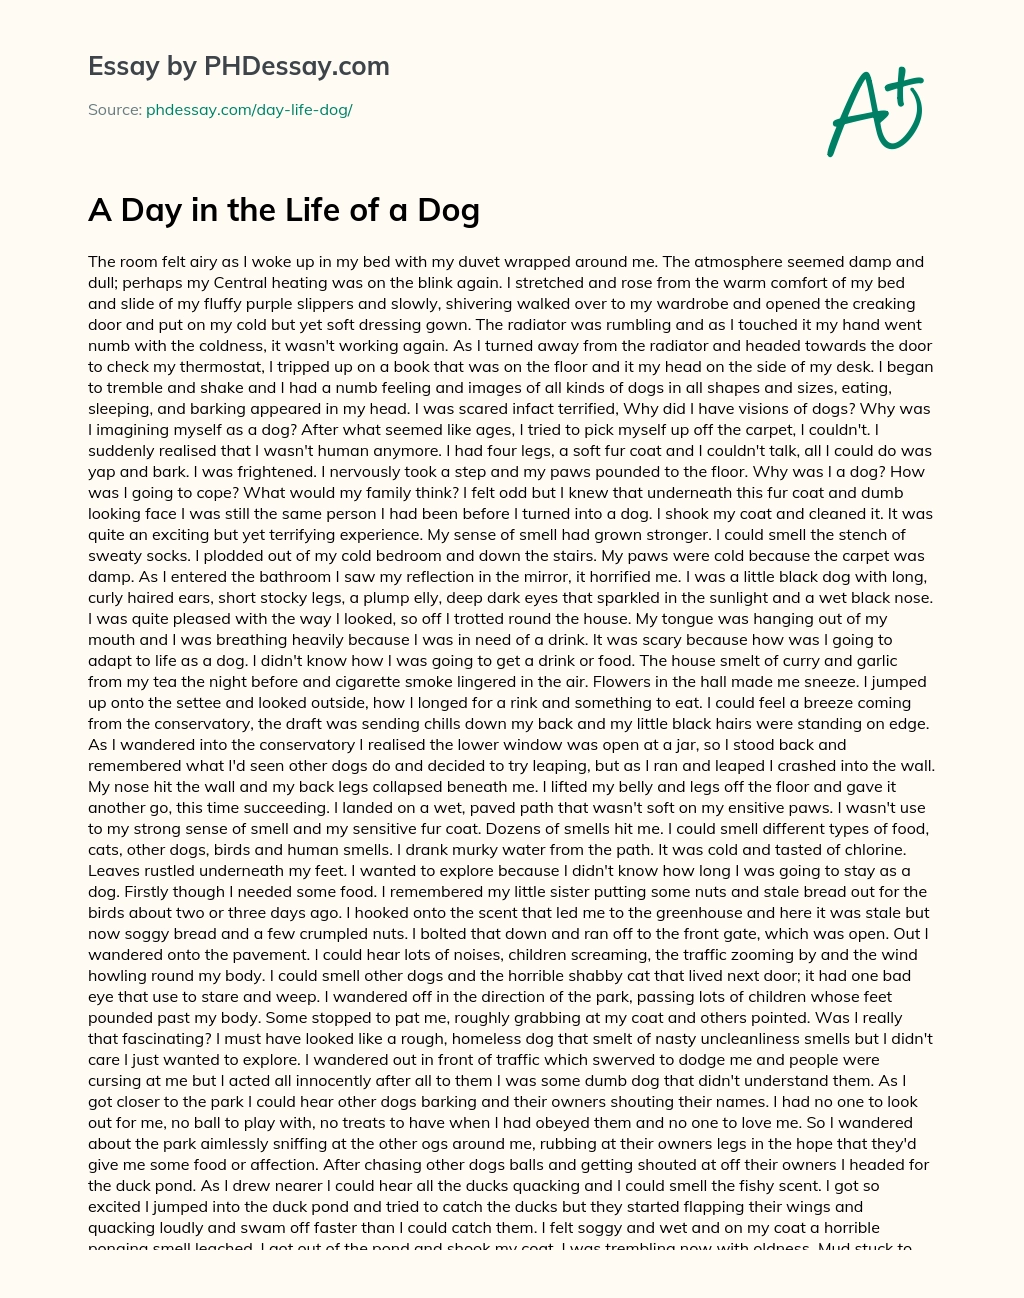 a day in the life of a dog photo essay